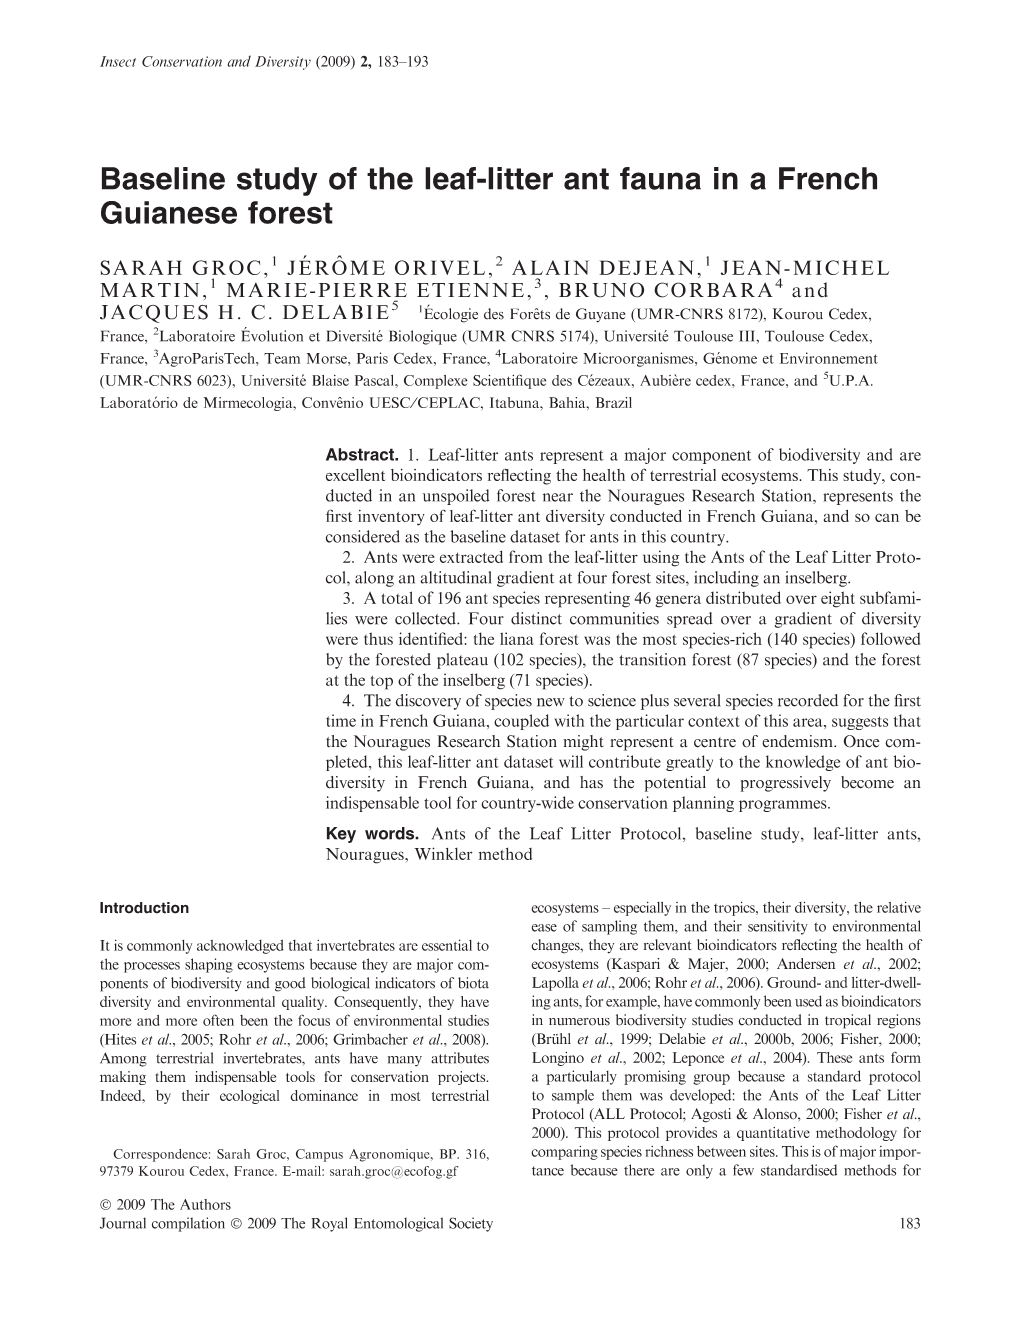 Baseline Study of the Leaf-Litter Ant Fauna in a French Guianese Forest